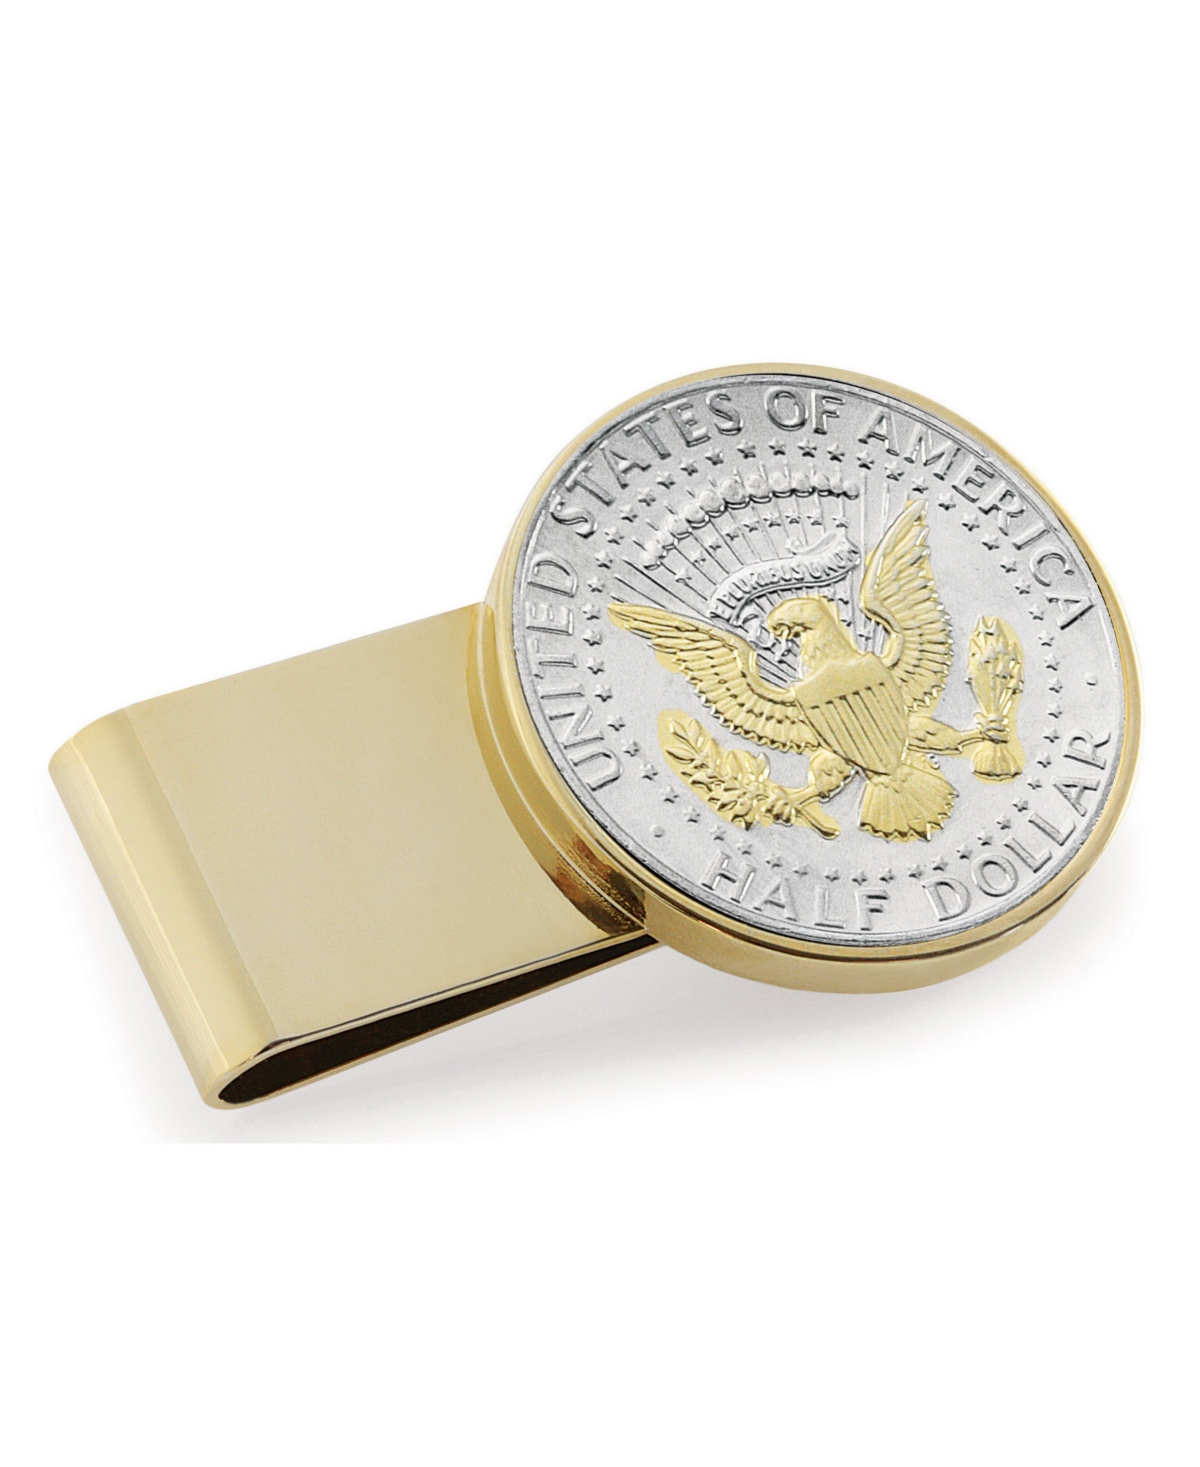 Men's American Coin Treasures Selectively Gold-Layered Presidential Seal Jfk Half Dollar Stainless Steel Coin Money Clip - Gold